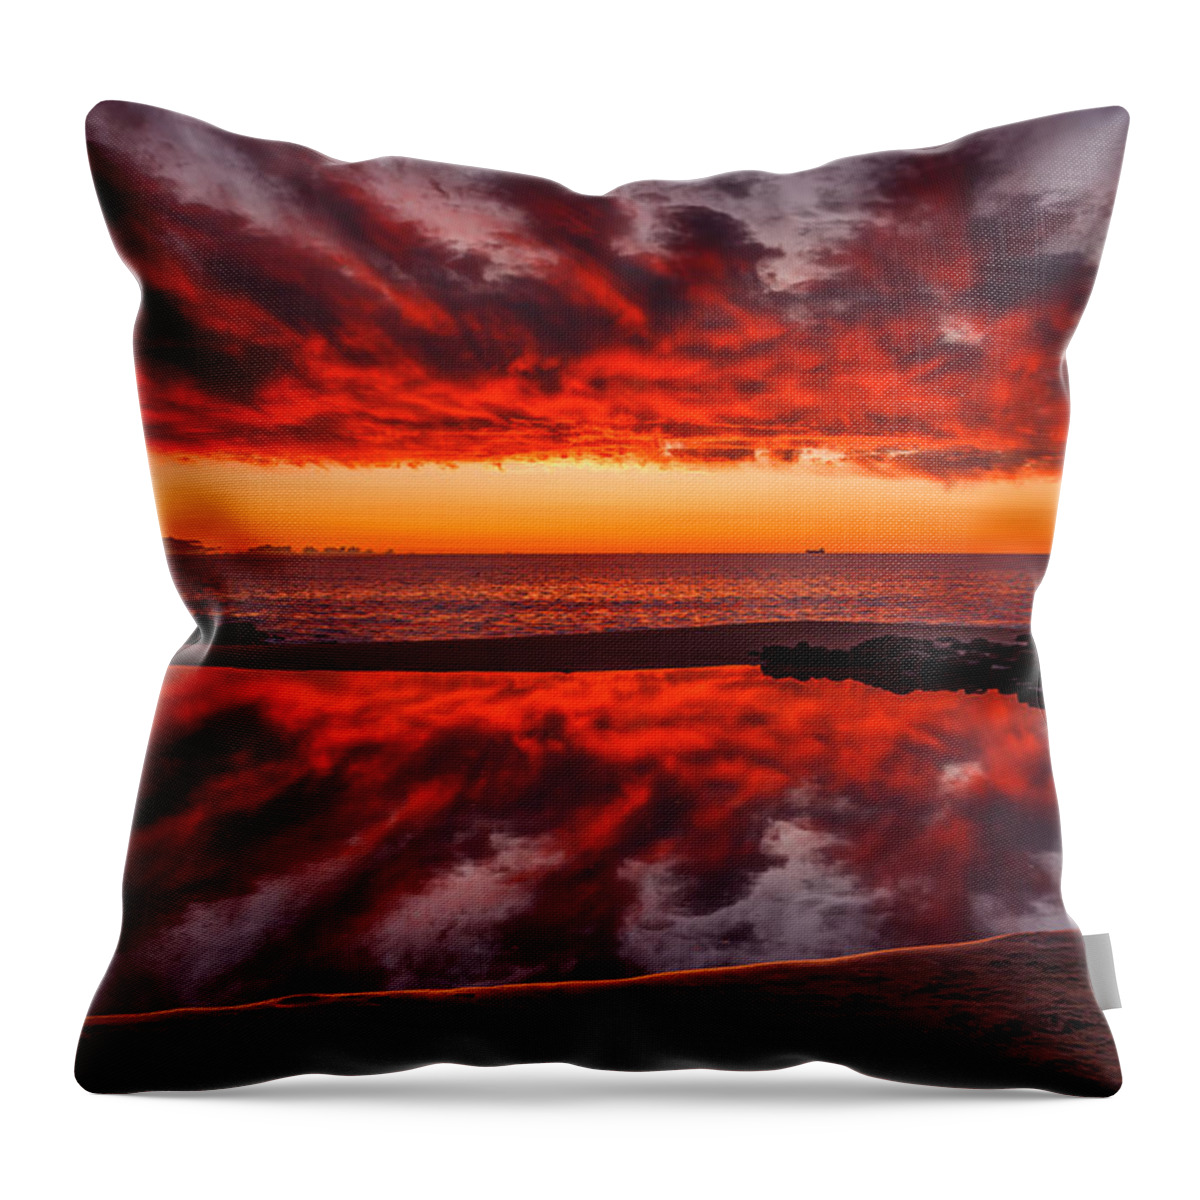 Sunset Throw Pillow featuring the photograph Rock Pool Reflections by Robert Caddy